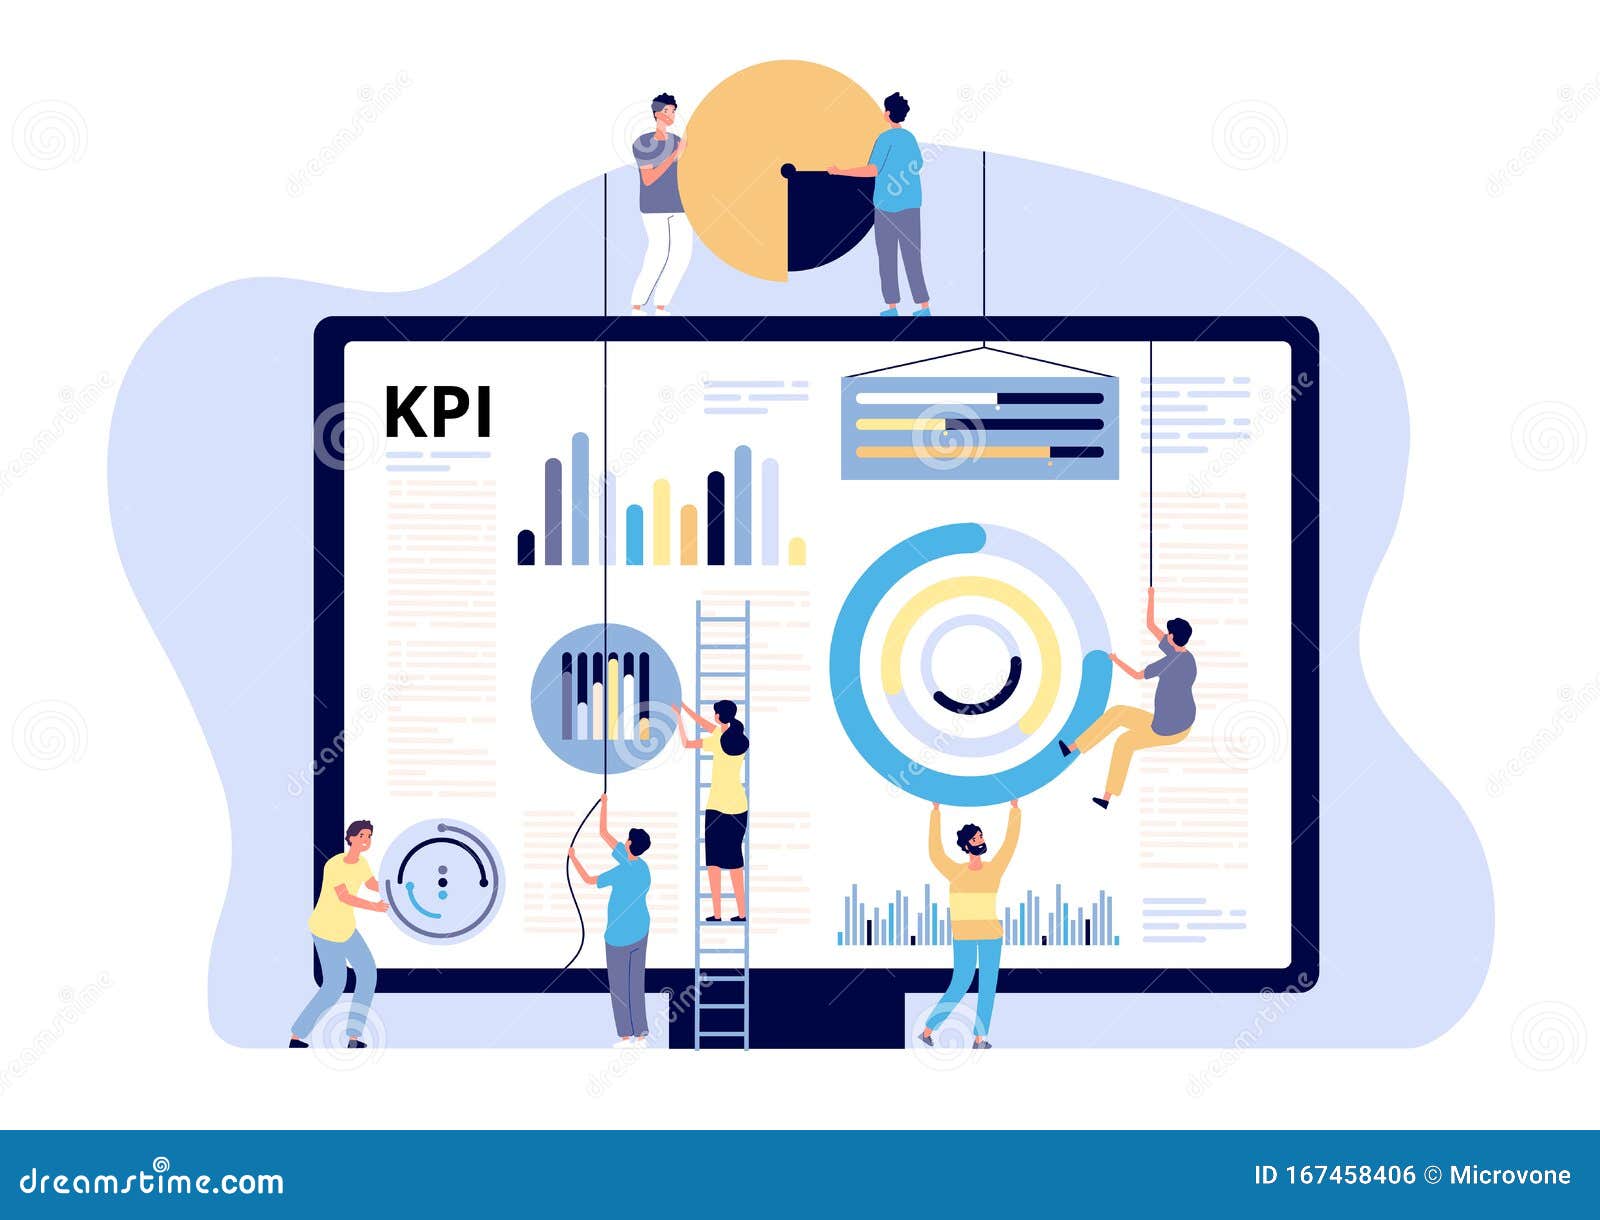 kpi concept. key performance indicator marketing, business digital metric. campaign measuring, product traffic reports